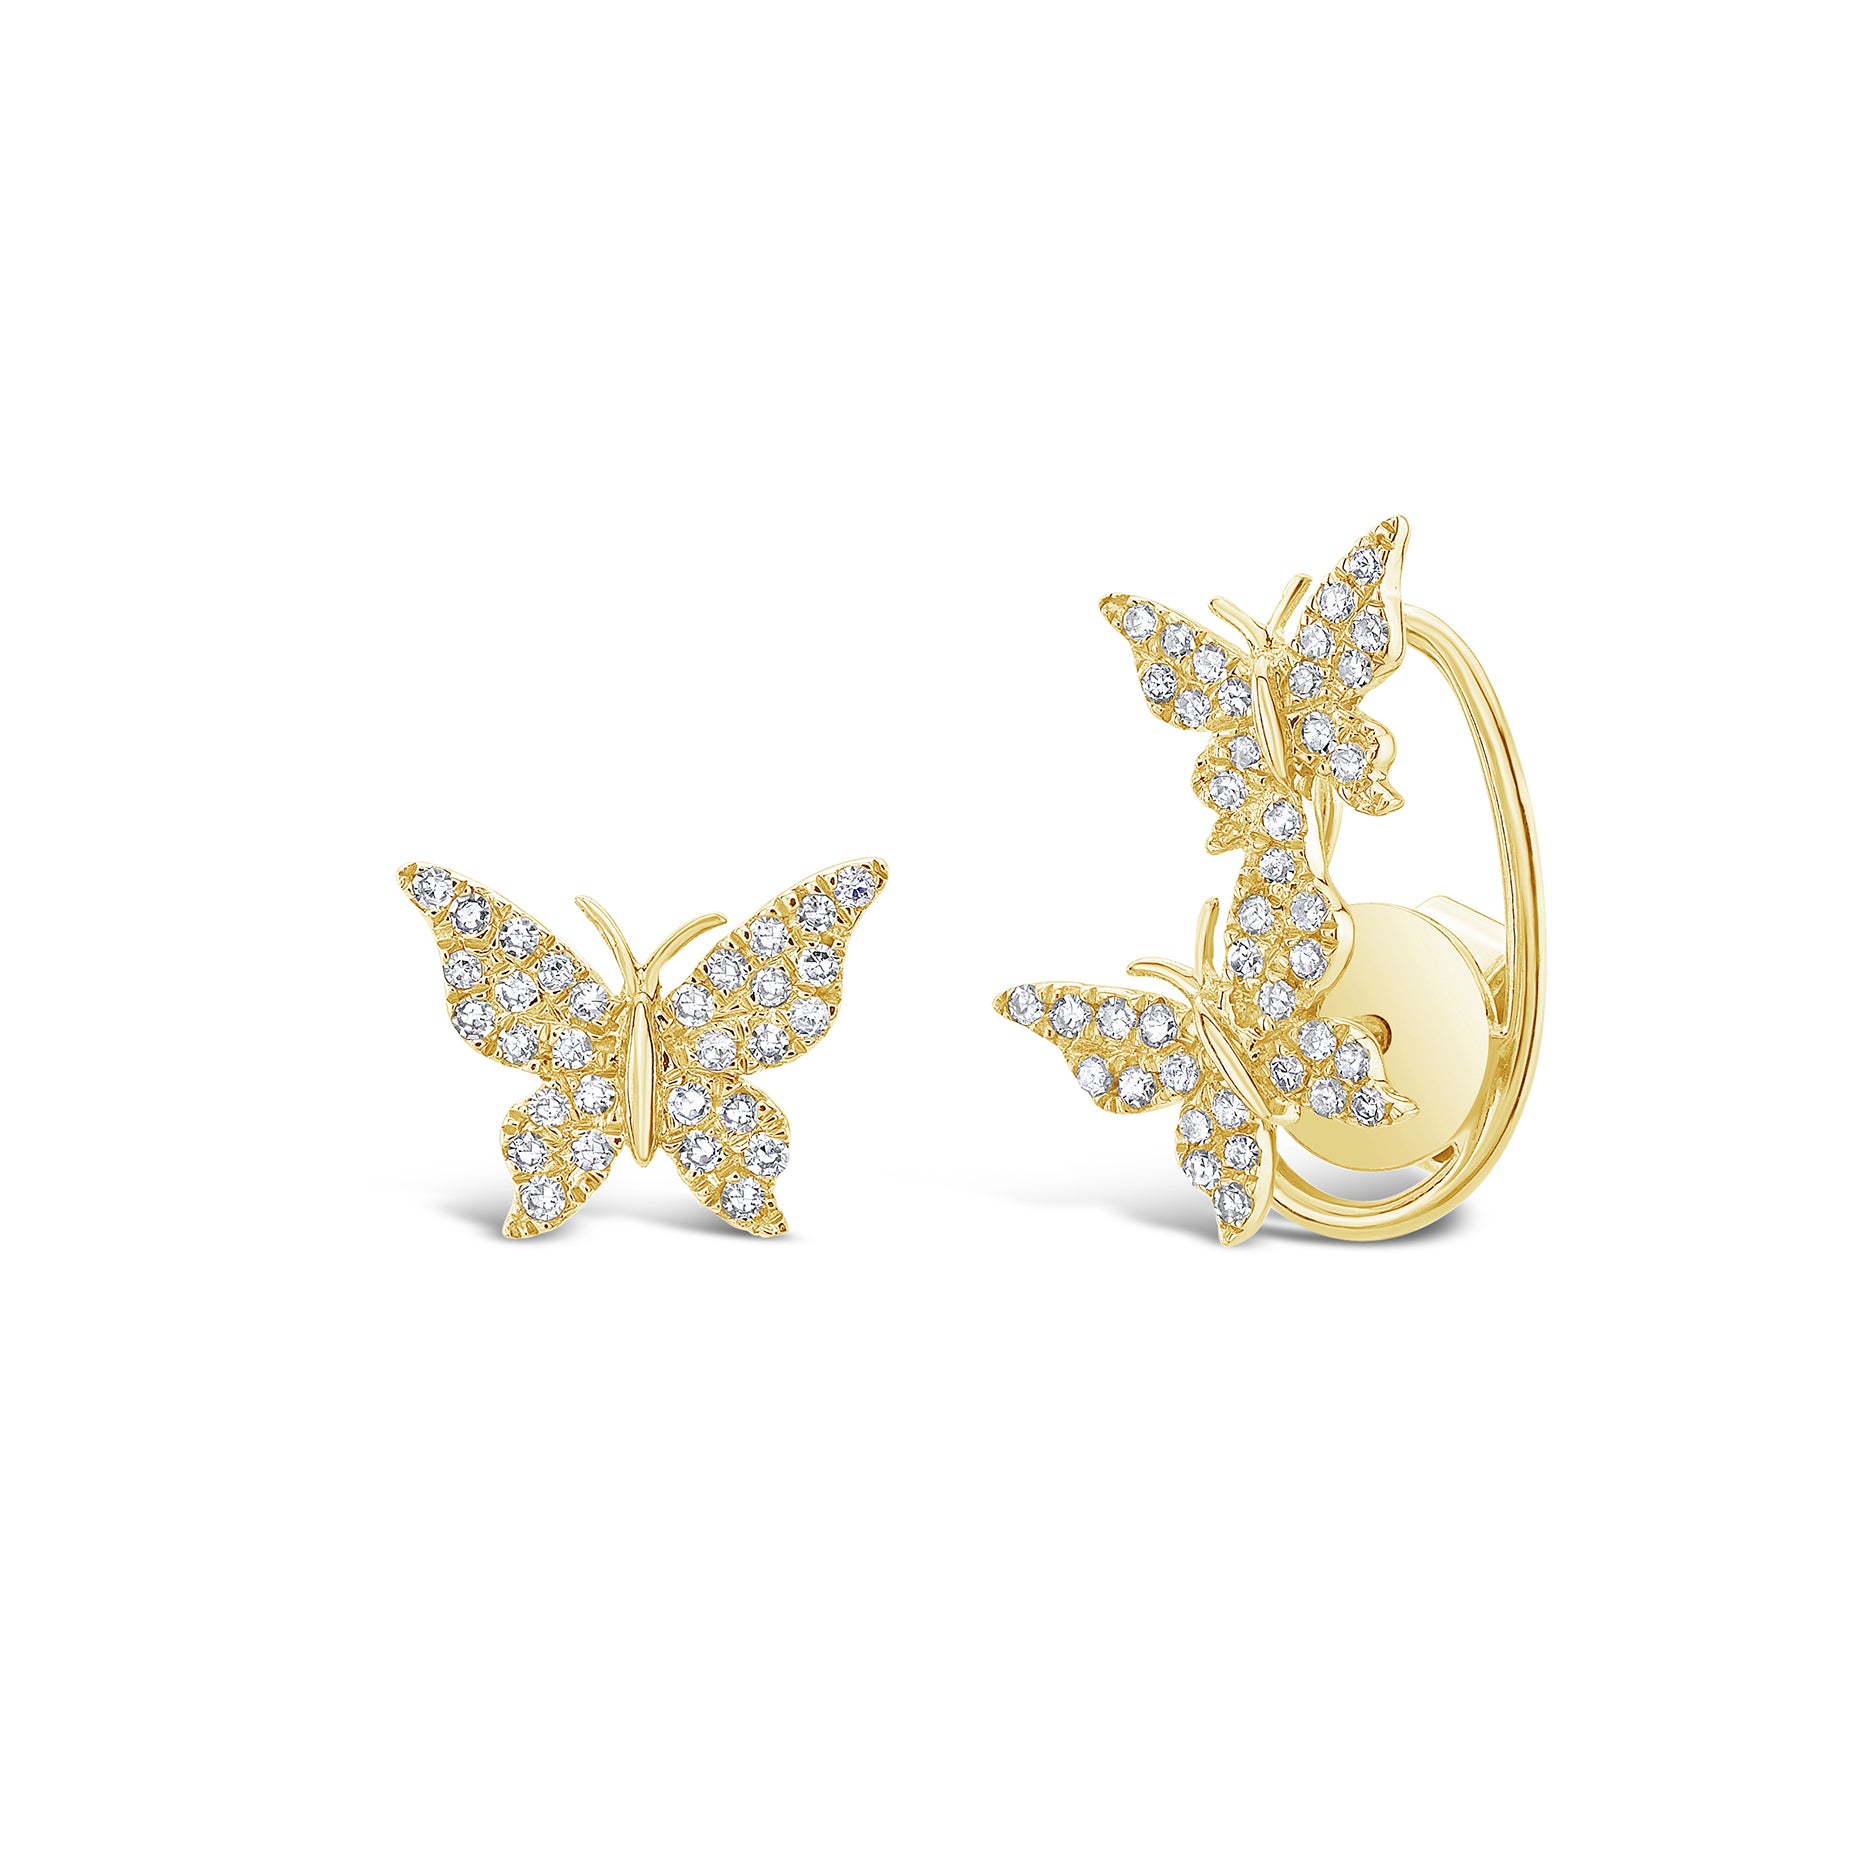 Diamond Butterfly Crawler Earrings - 14k gold weighing 1.50 grams - 70 round diamonds weighing .16 carats. Available in yellow, white, & rose gold.